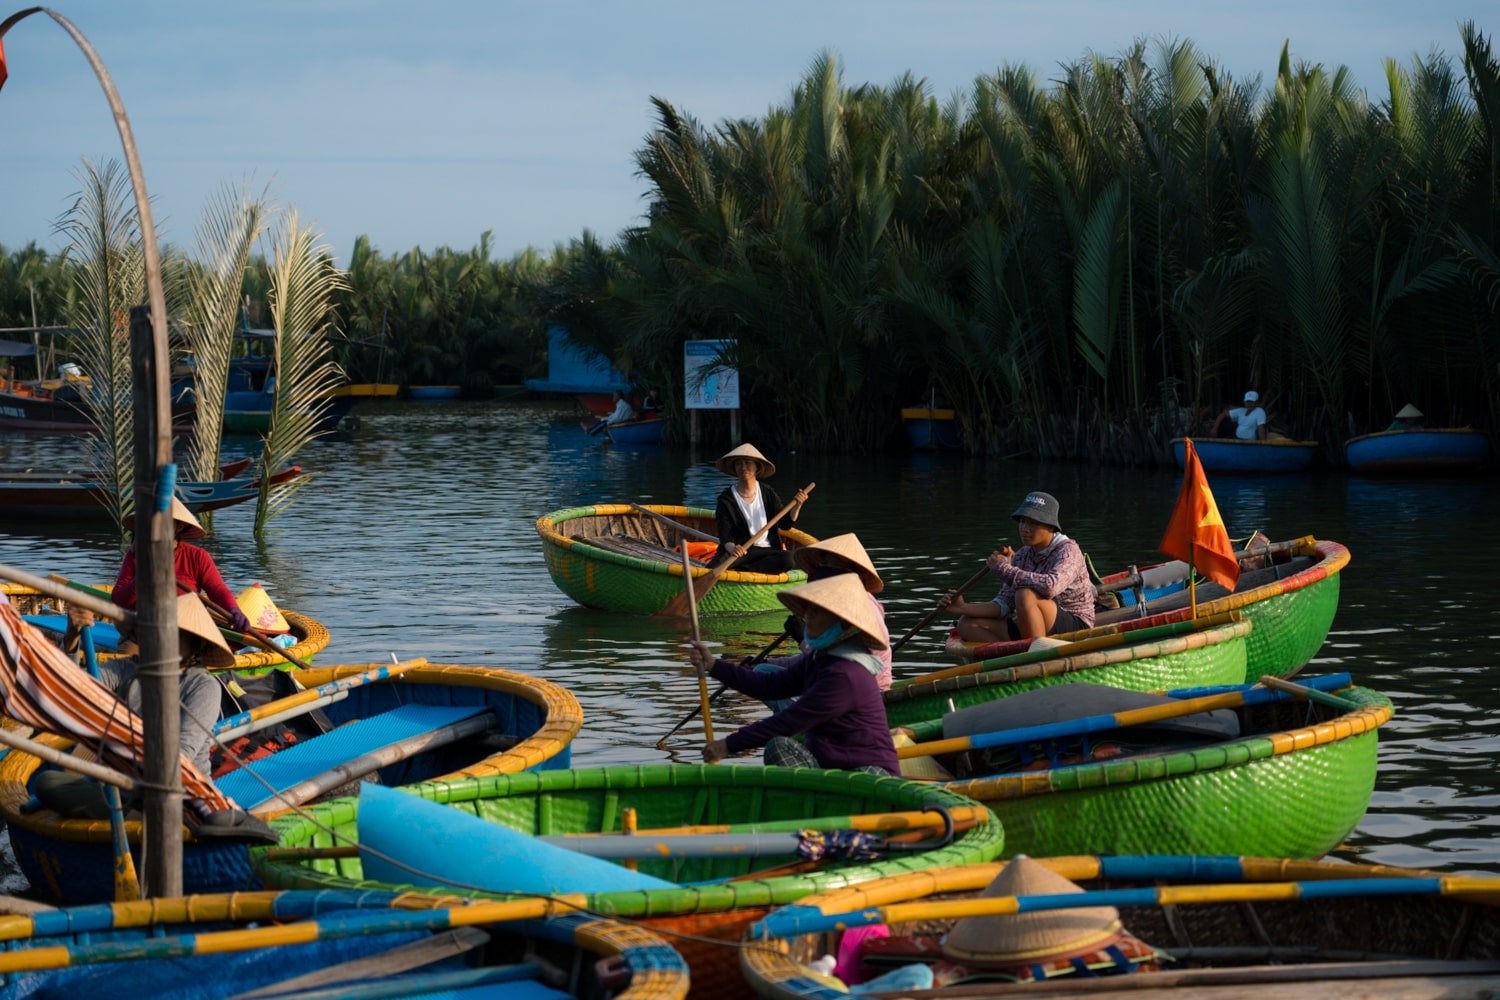 Hoi An's famous basket boats in Bay Mau Coconut Forest.